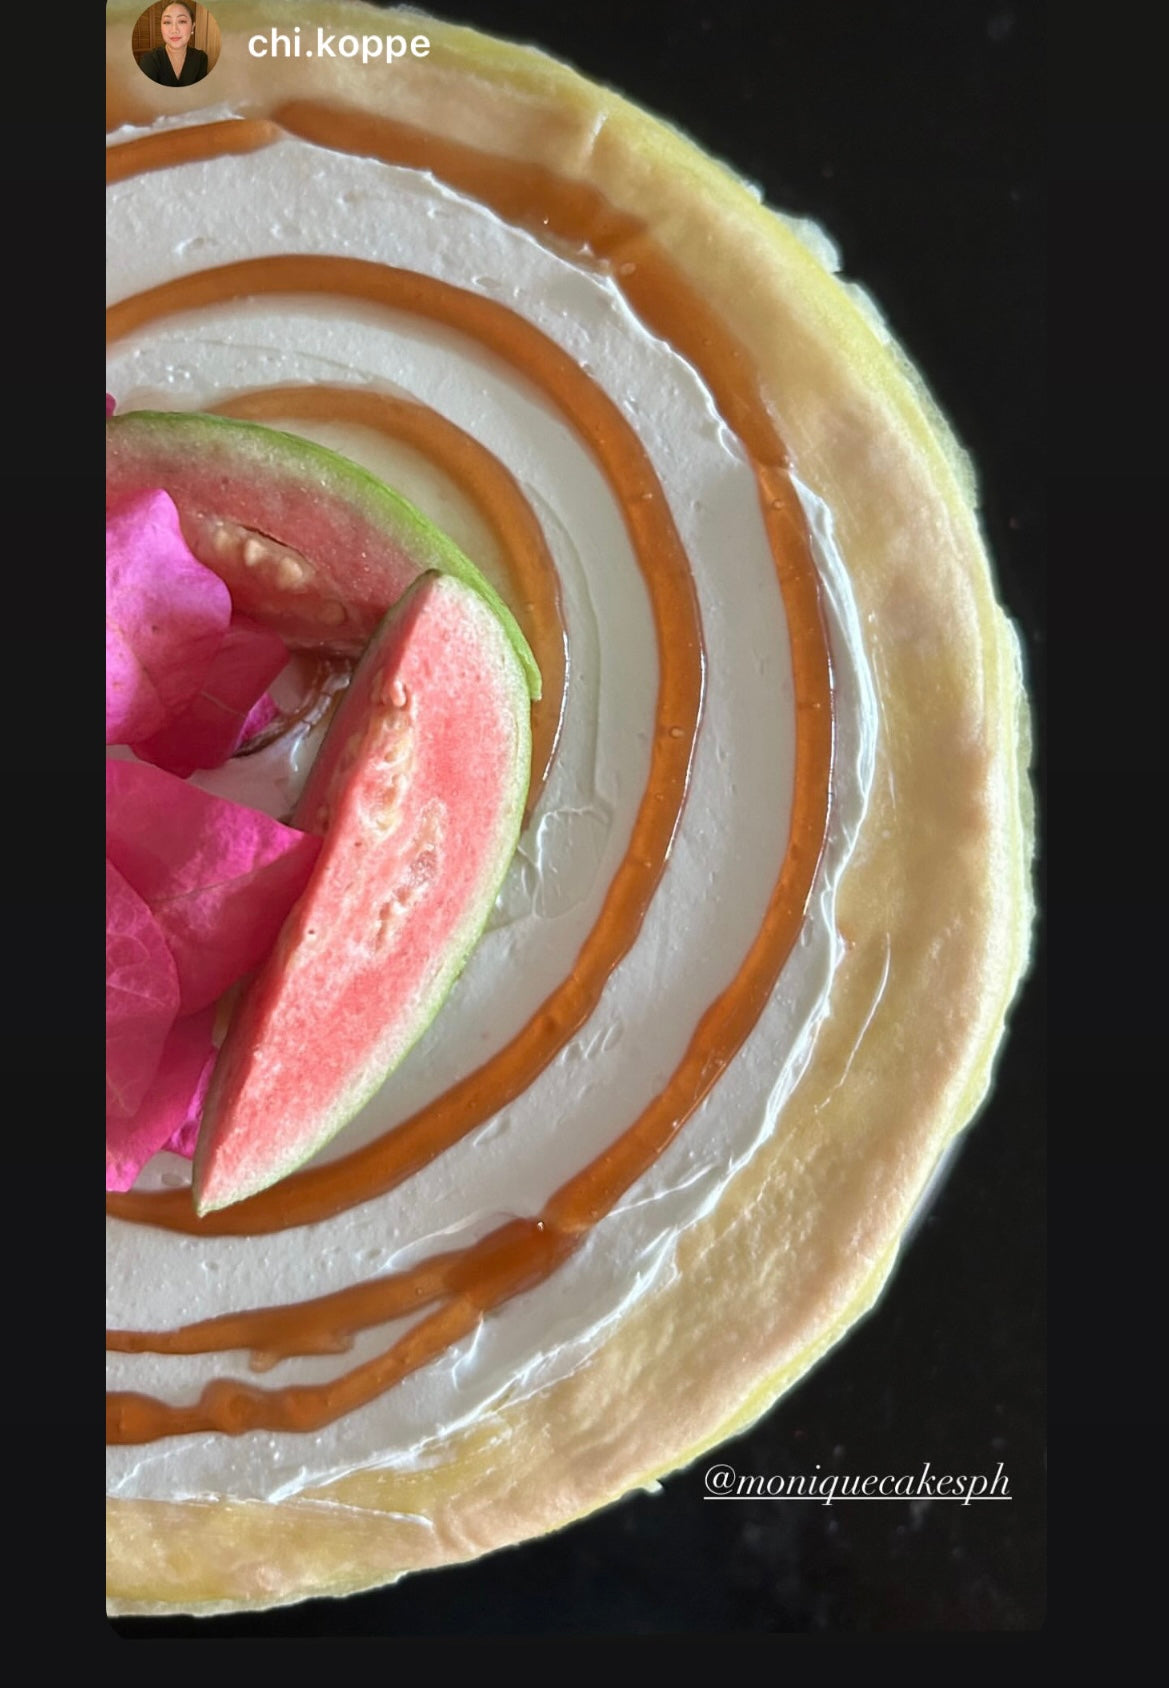 Guava Crêpe Cake - Mother’s Day Limited Offer